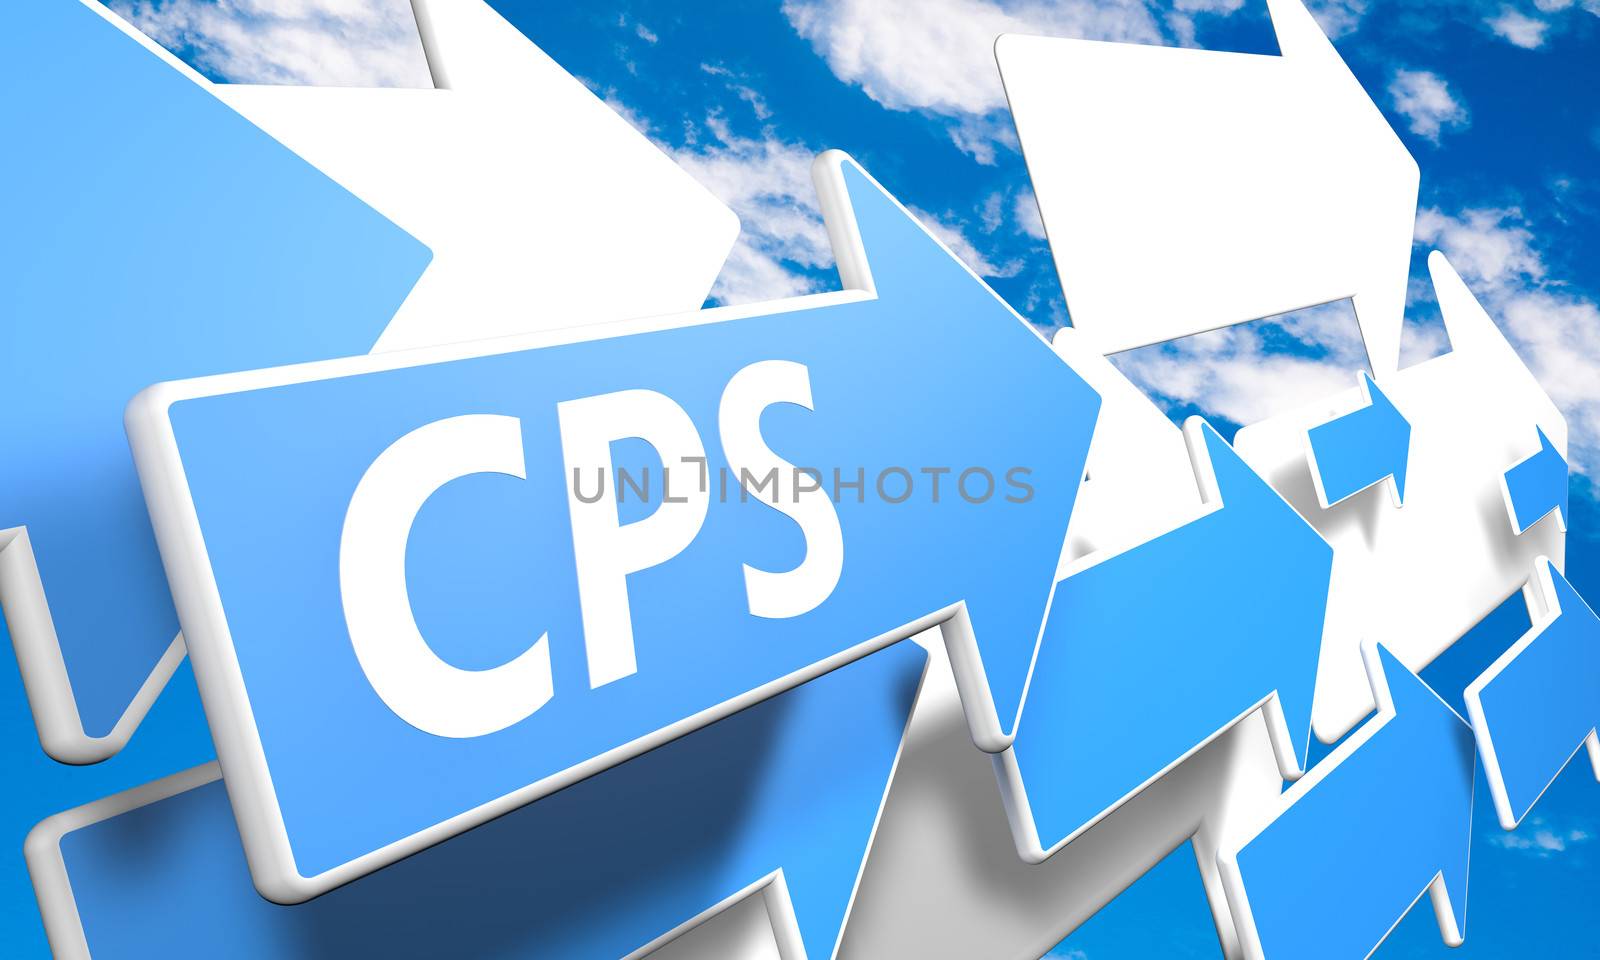 Cost per Sale 3d render concept with blue and white arrows flying in a blue sky with clouds